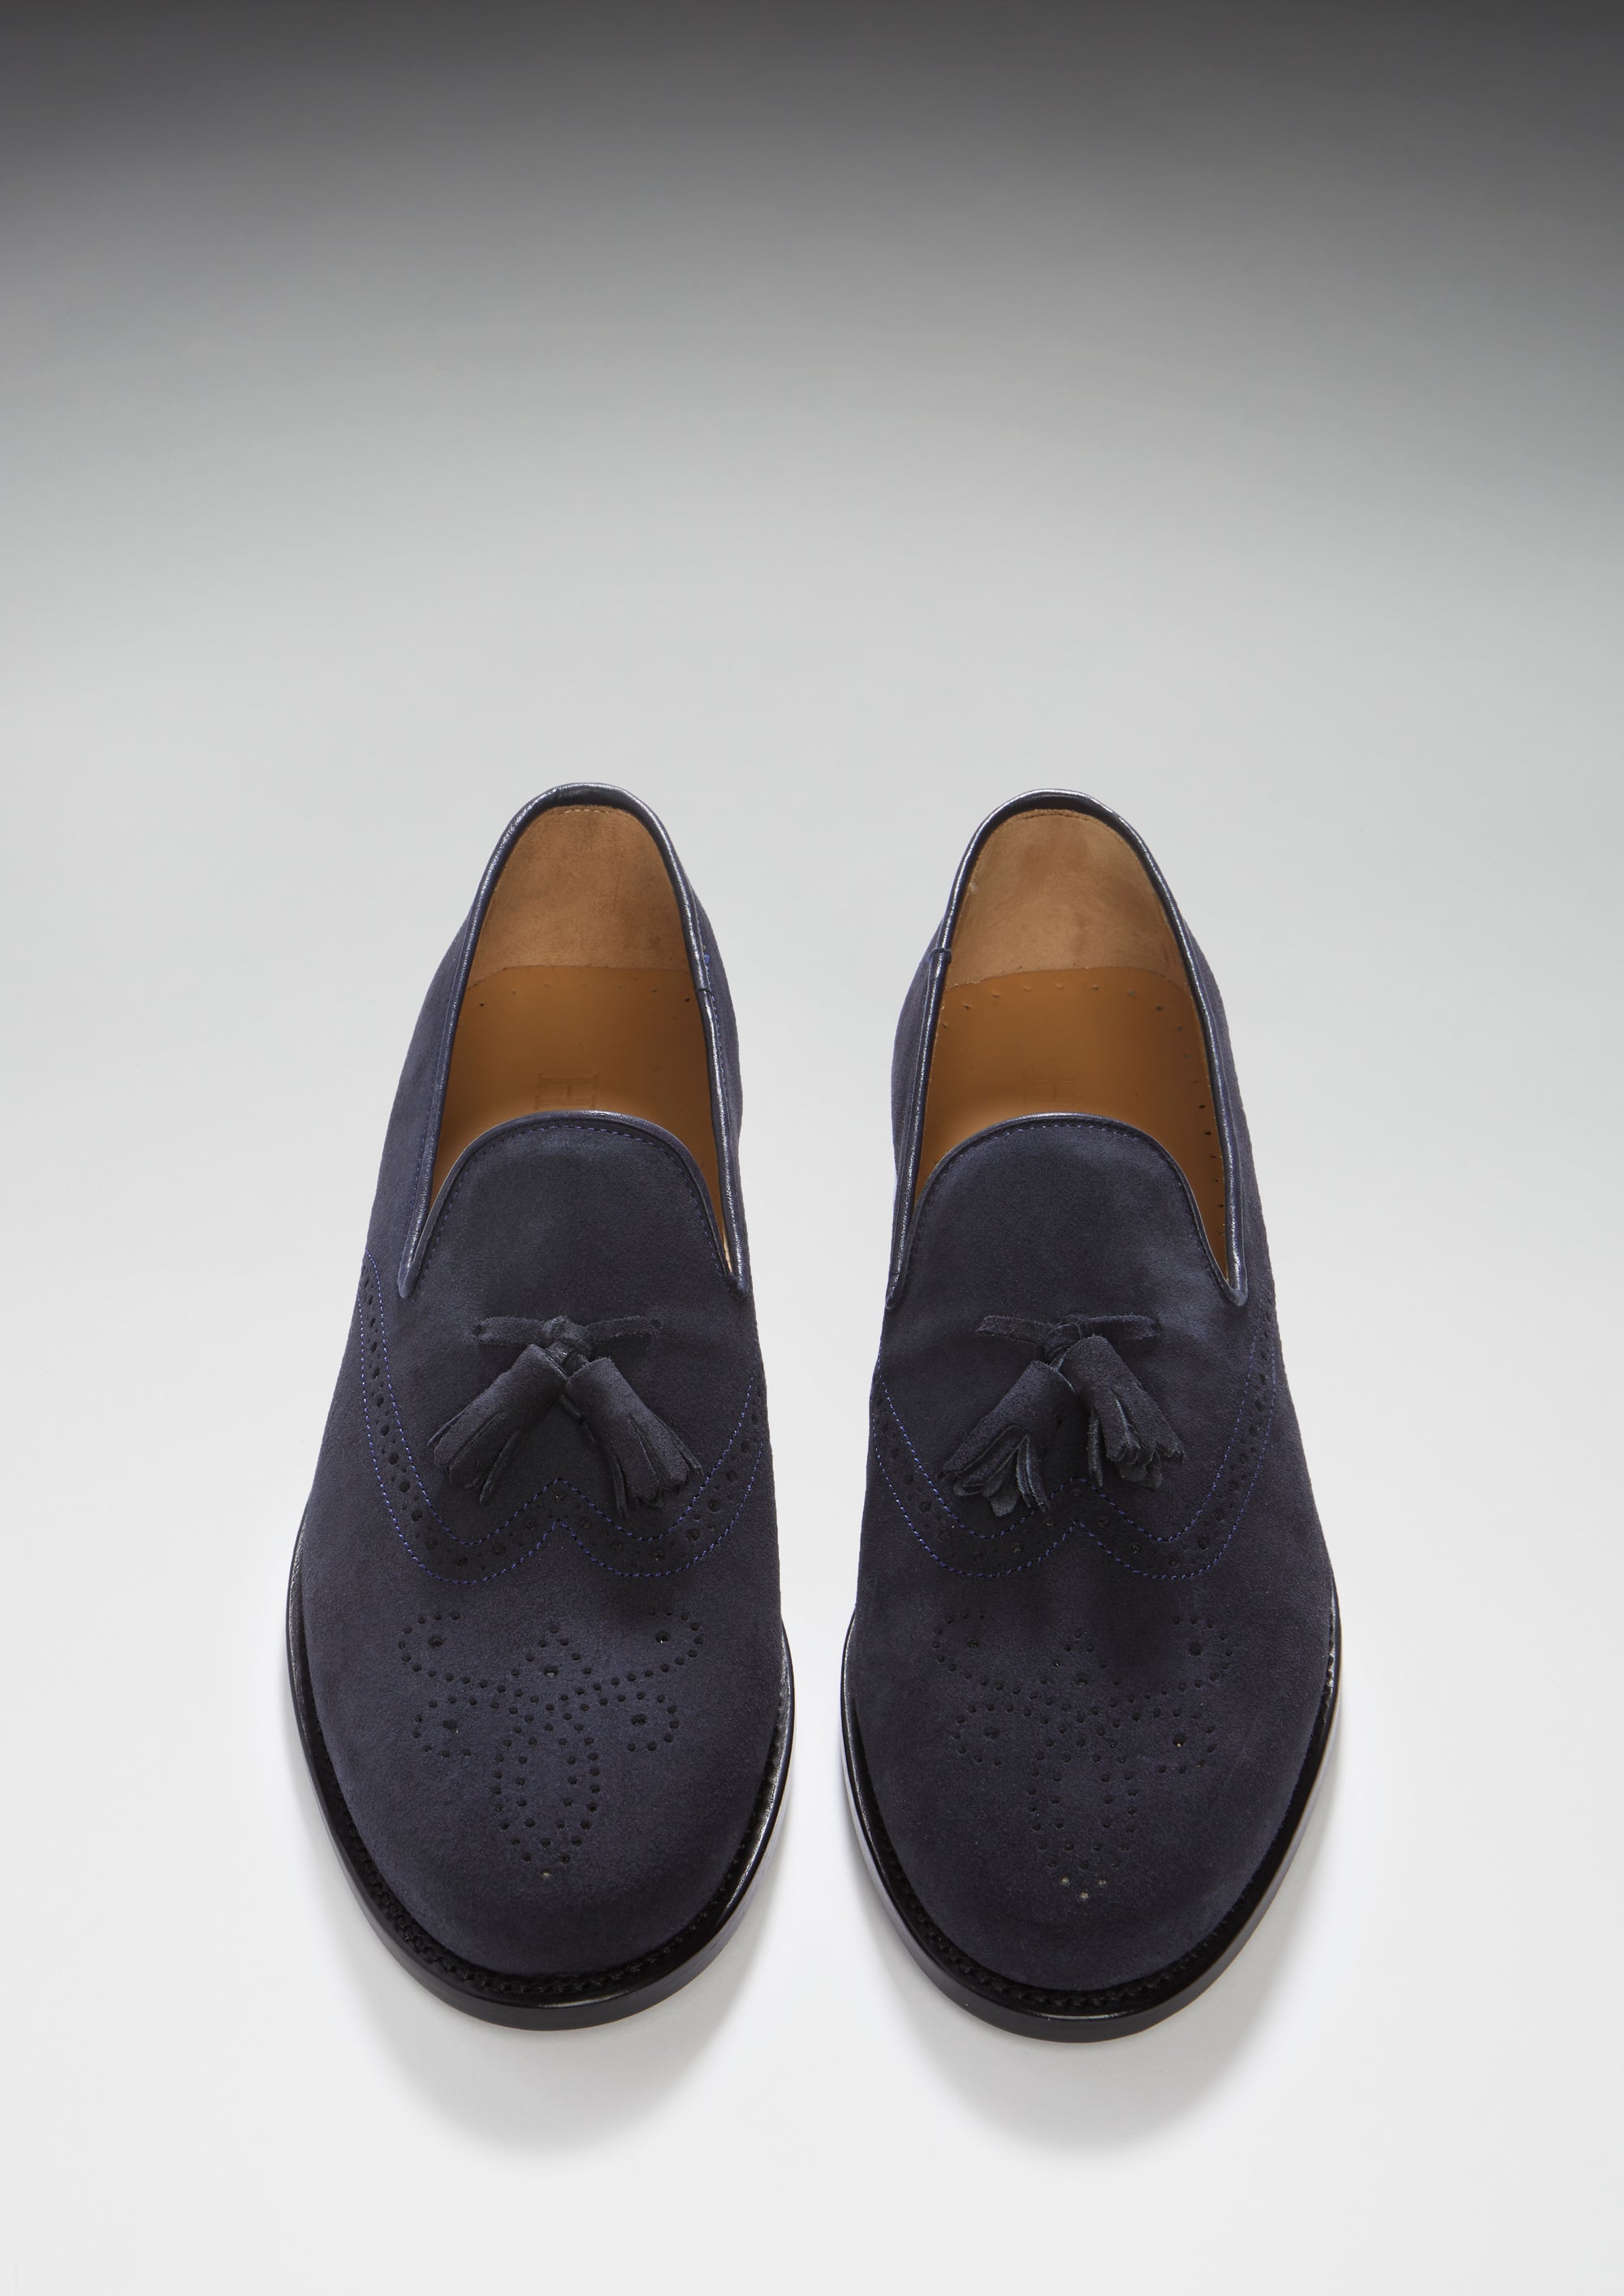 Navy Blue Suede Tasselled Brogues, Welted Leather Sole